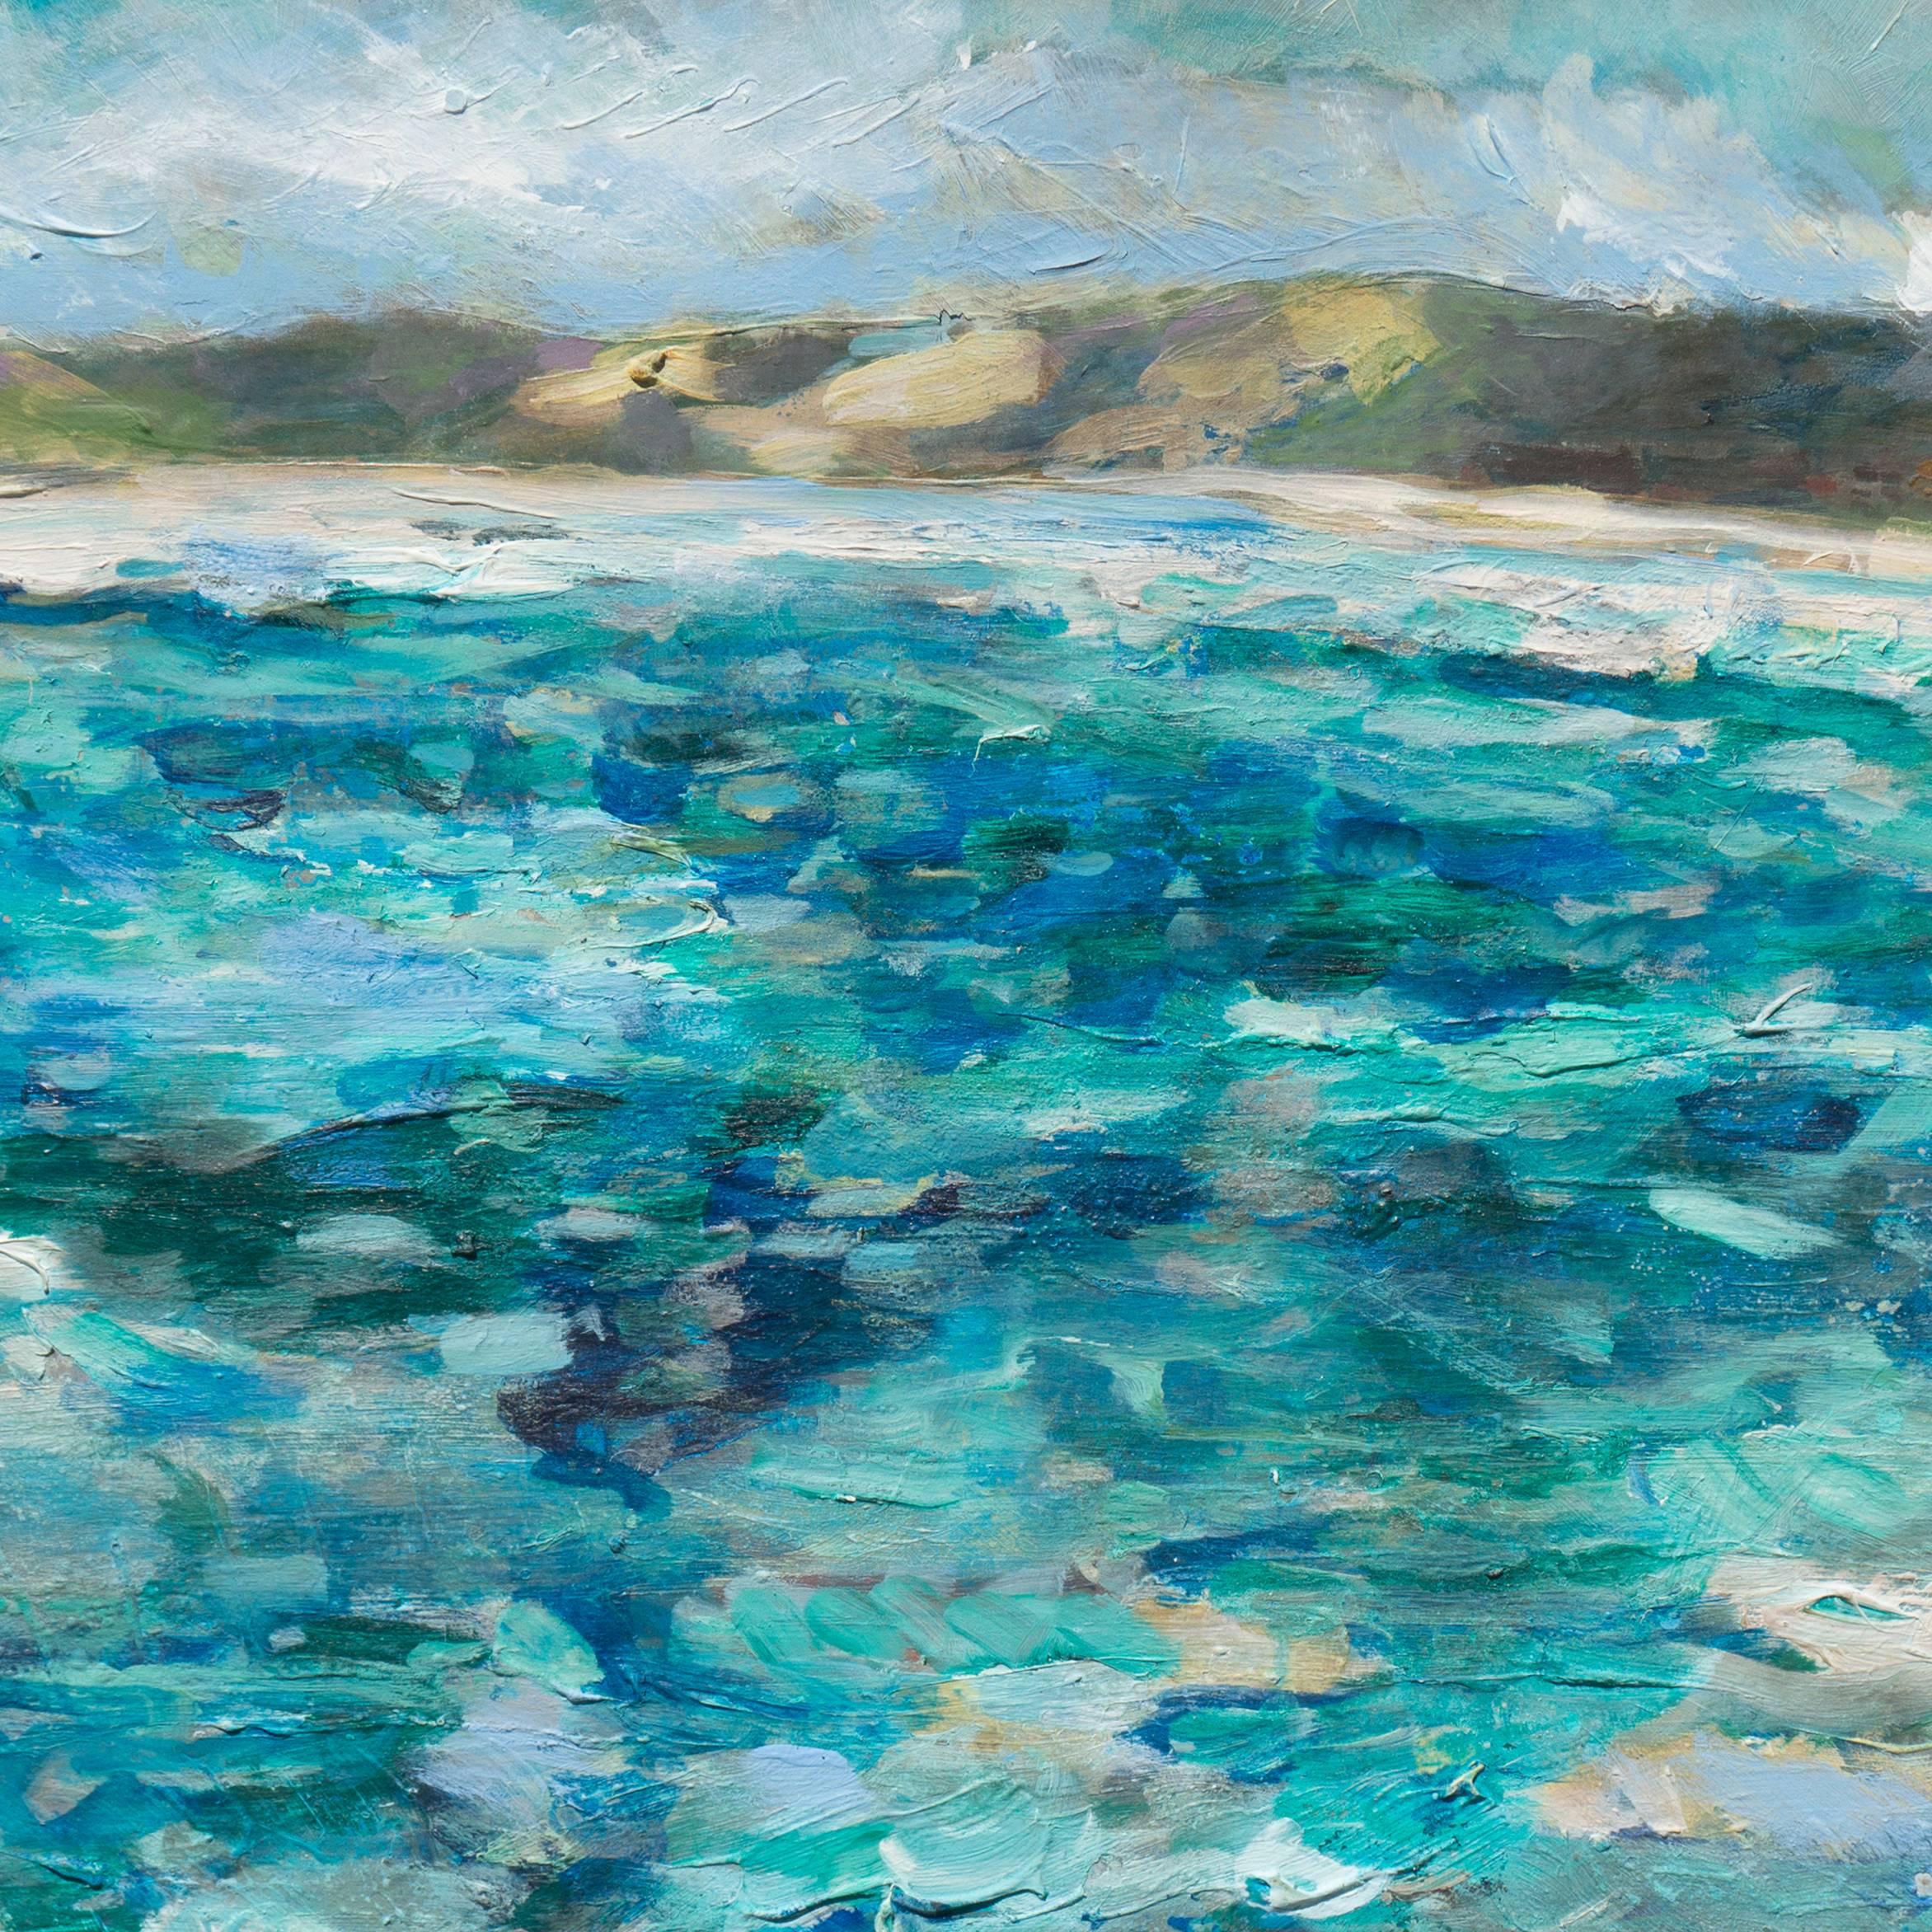 Monterey Bay - Painting by Robert Canete